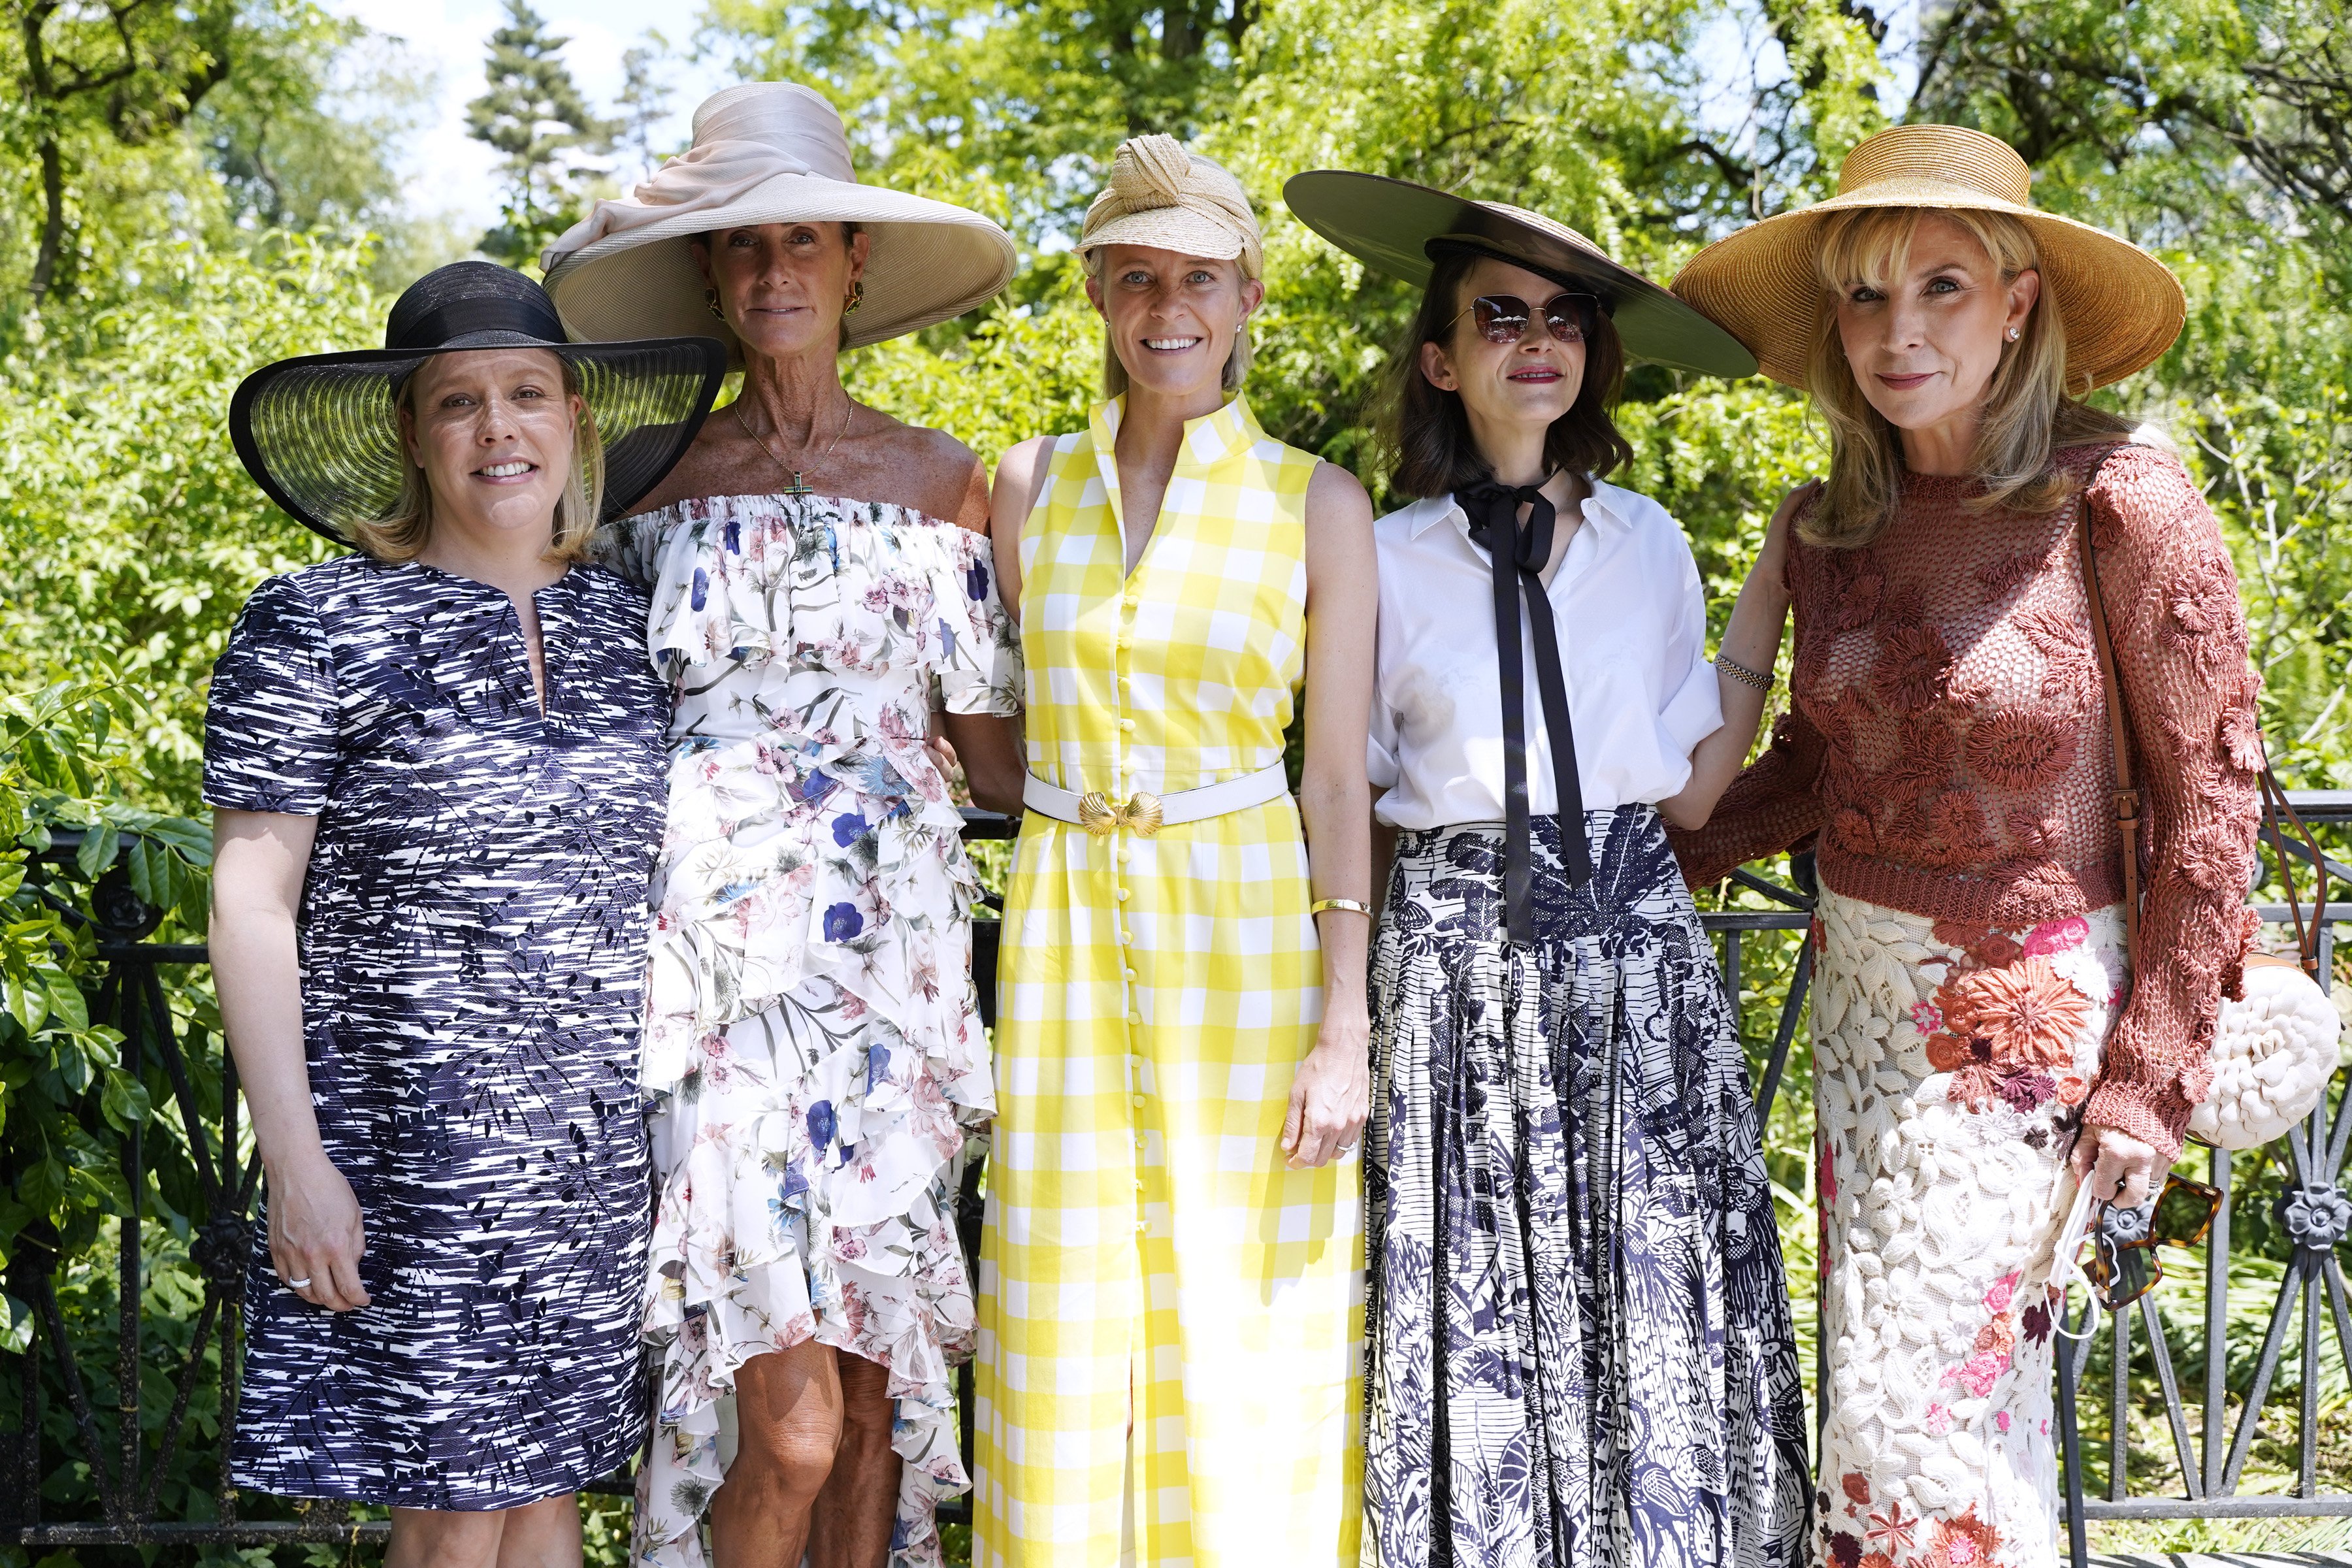  Elizabeth Rogers, Somers Farkas, Jocelyn Gailliot, Anne Stringfield and Margo Nederlander attend the Central Park Conservancy's 39th Annual Frederick Law Olmsted Awards Luncheon on May 18, 2021 in New York City. | Source: Getty Images